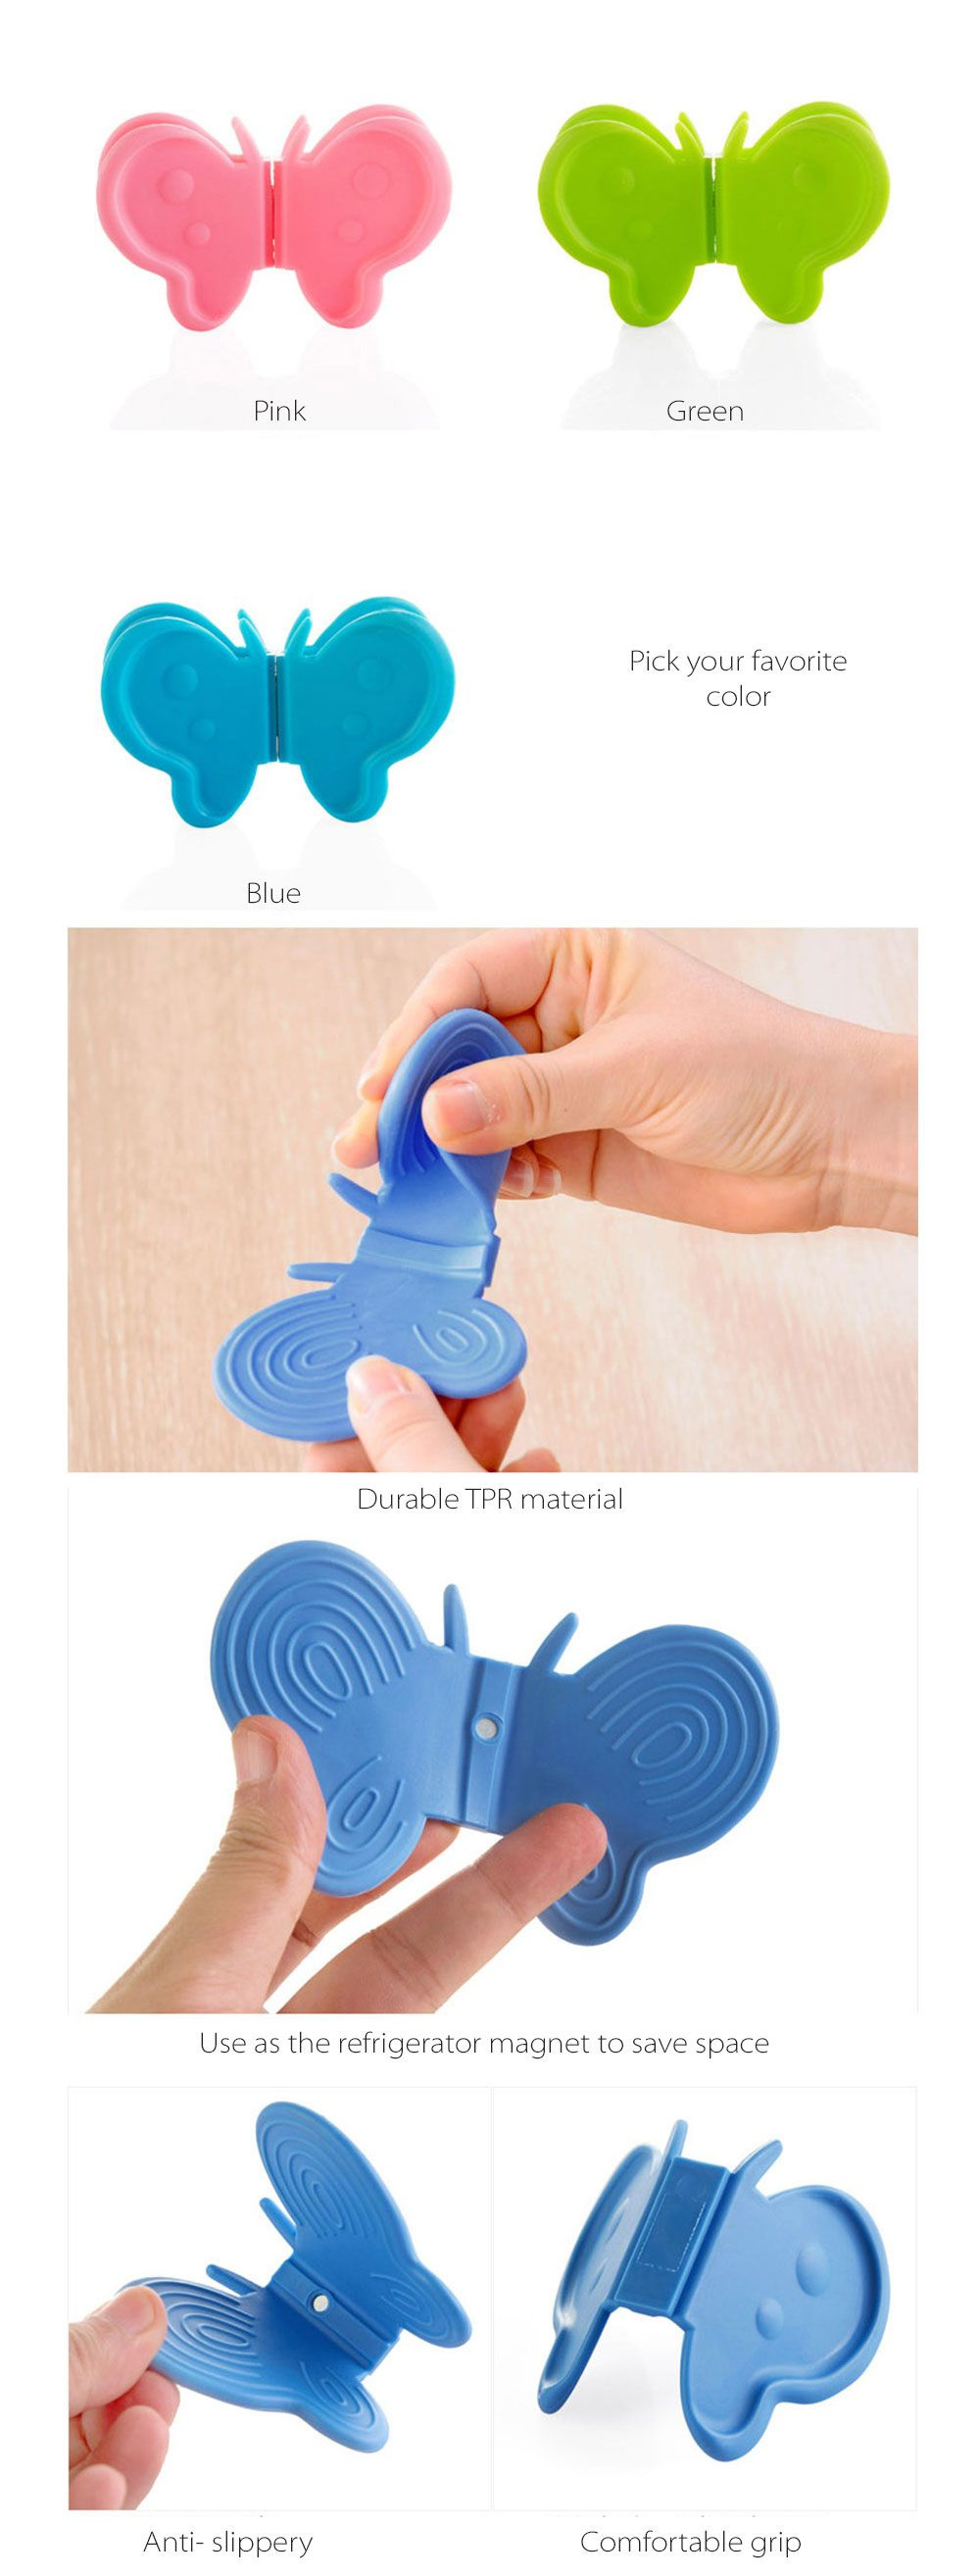 Butterfly Silicone Pot Holders from Apollo Box